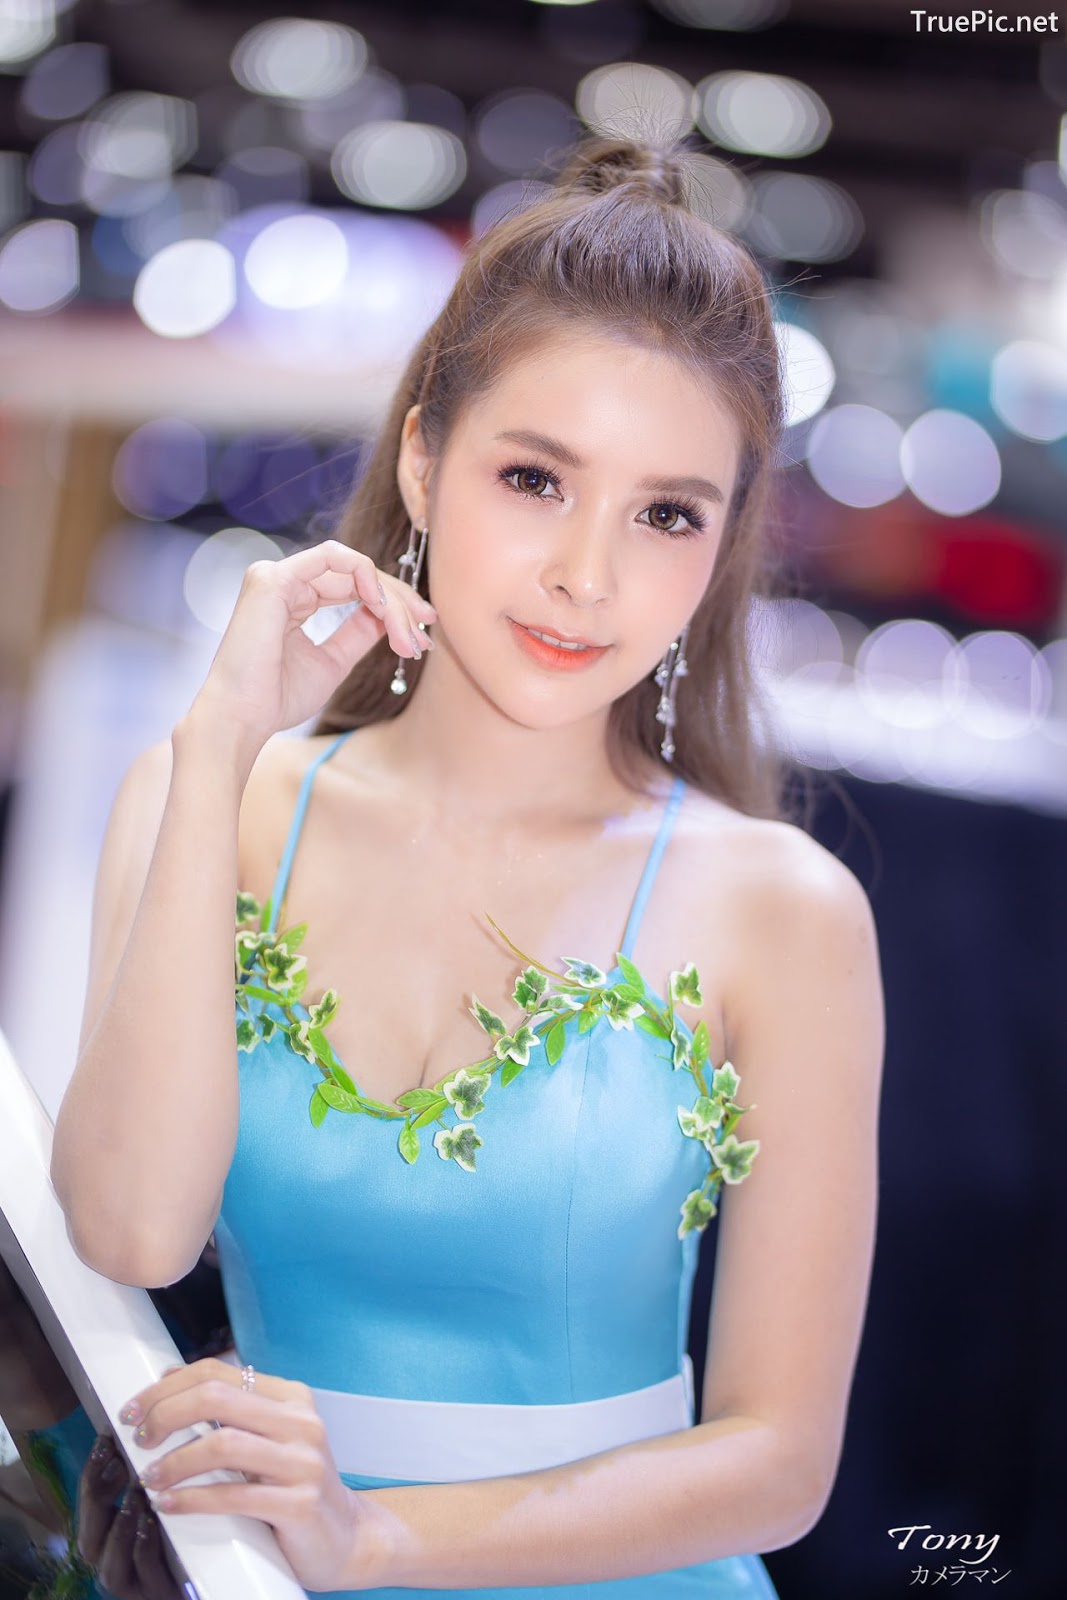 Image-Thailand-Hot-Model-Thai-Racing-Girl-At-Motor-Show-2019-TruePic.net- Picture-66